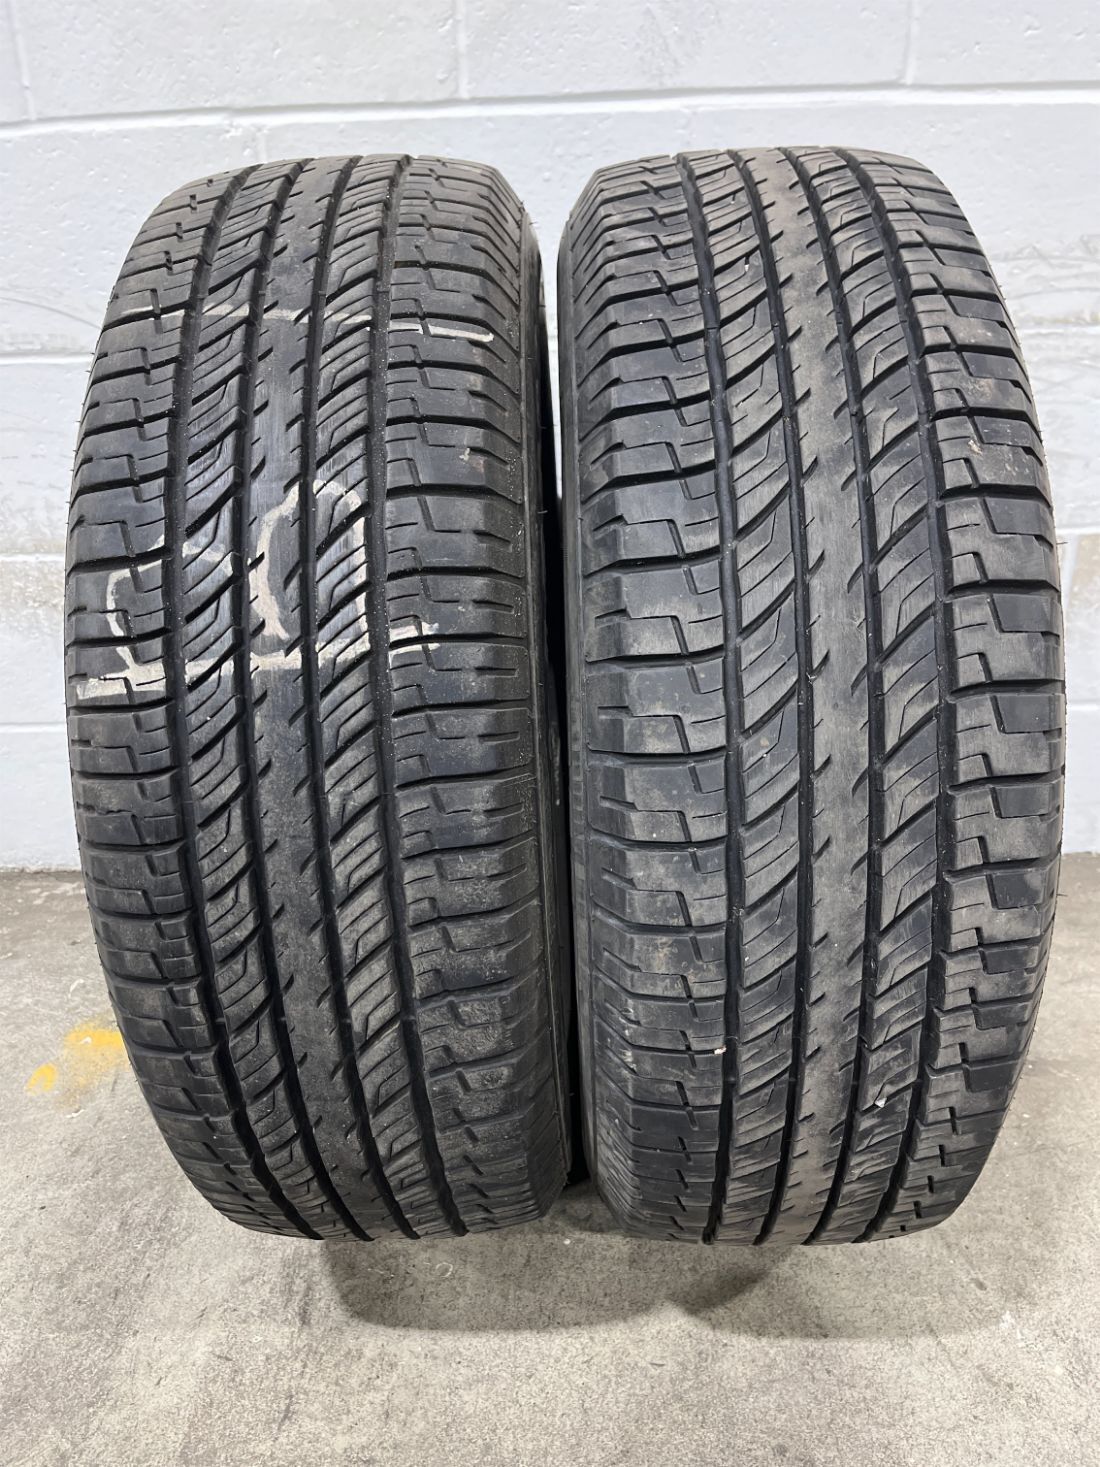 2x P235/65R18 Uniroyal Laredo Cross Country Tour 10/32 Used Tires